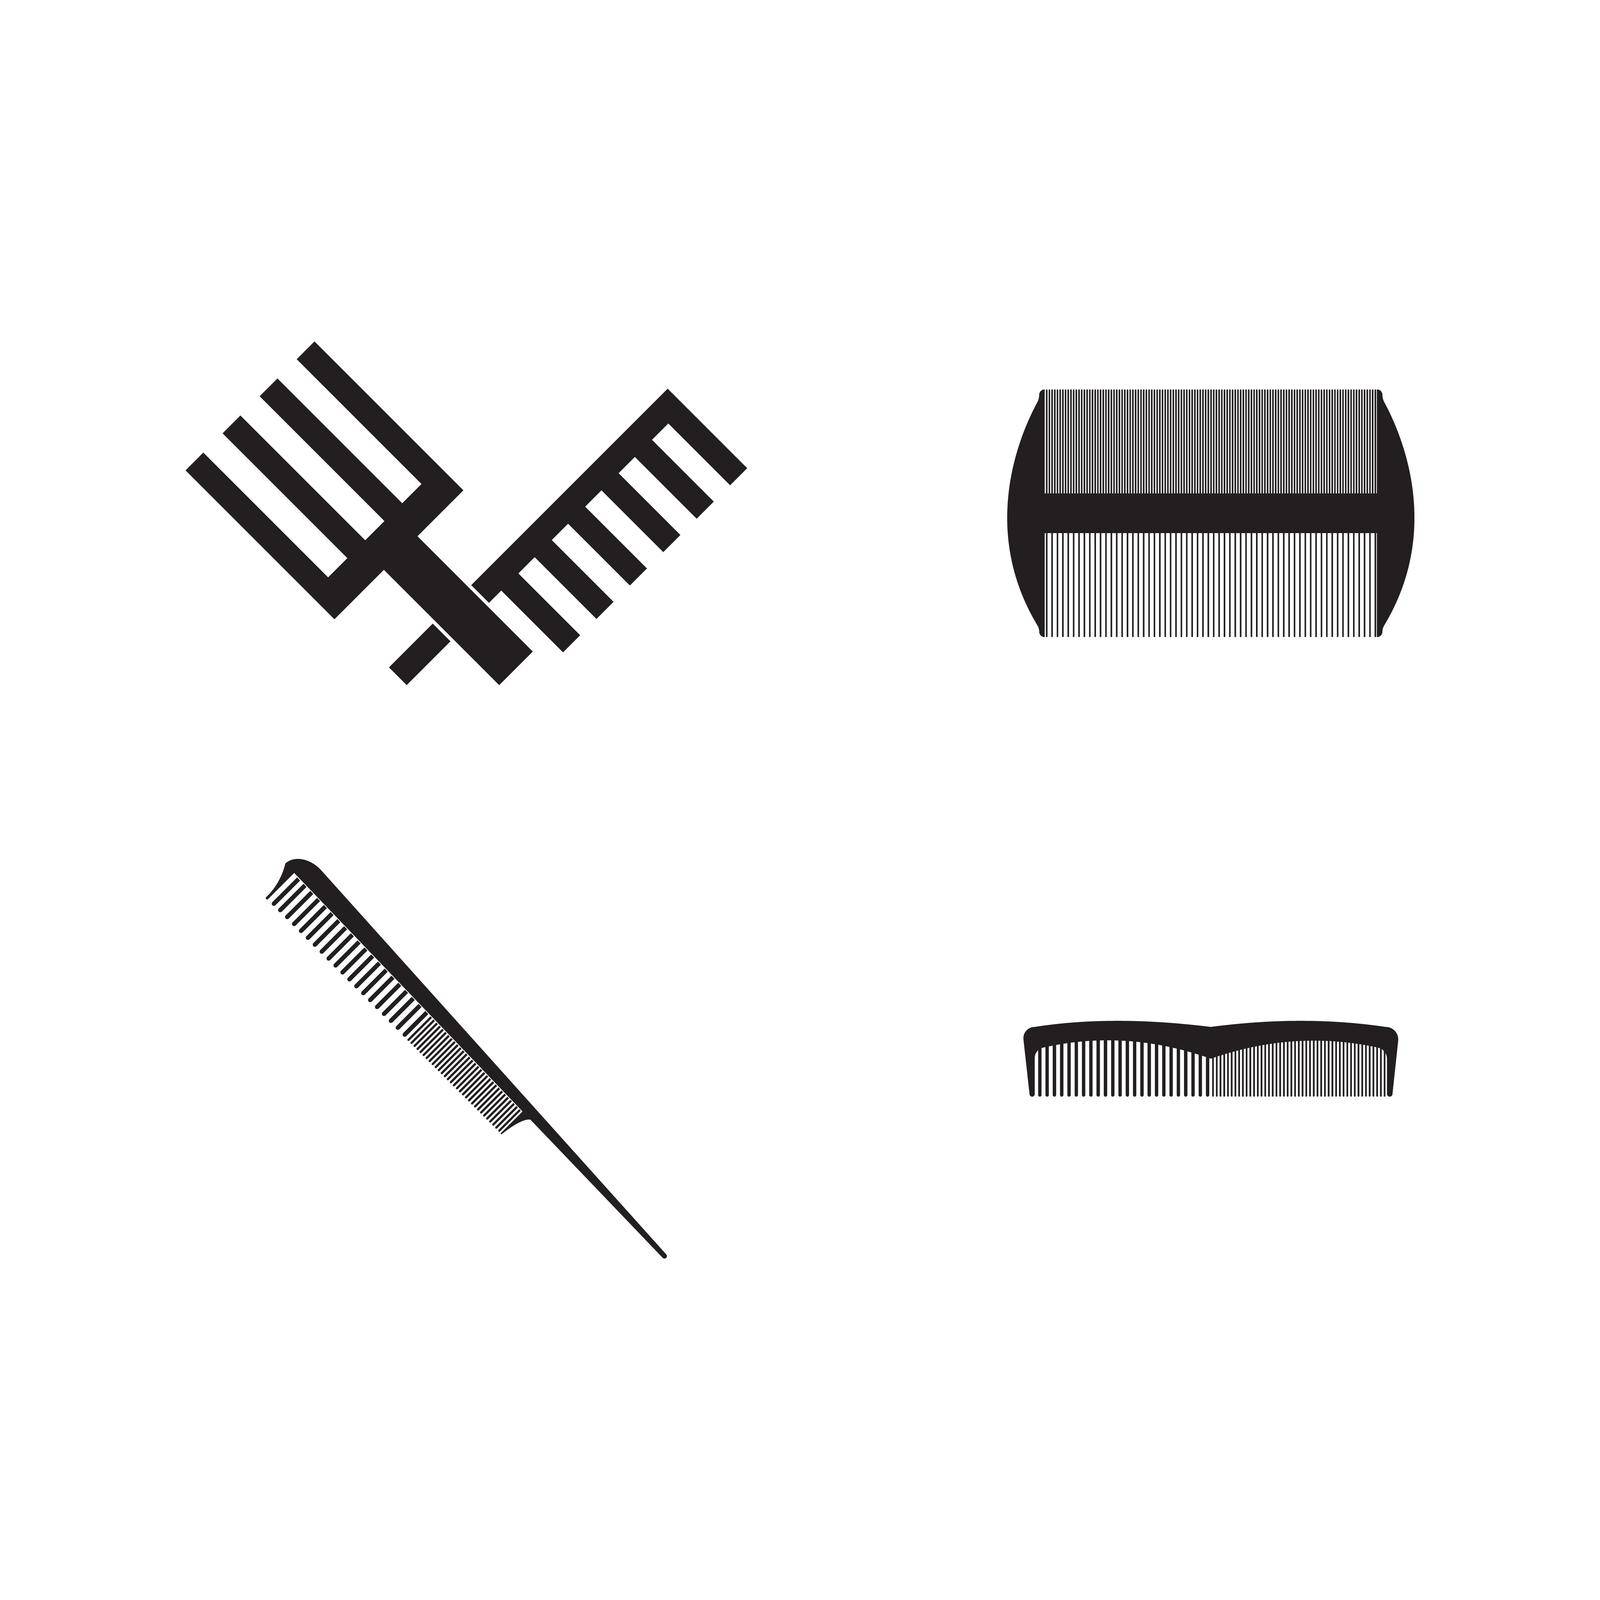 Comb icon by rnking